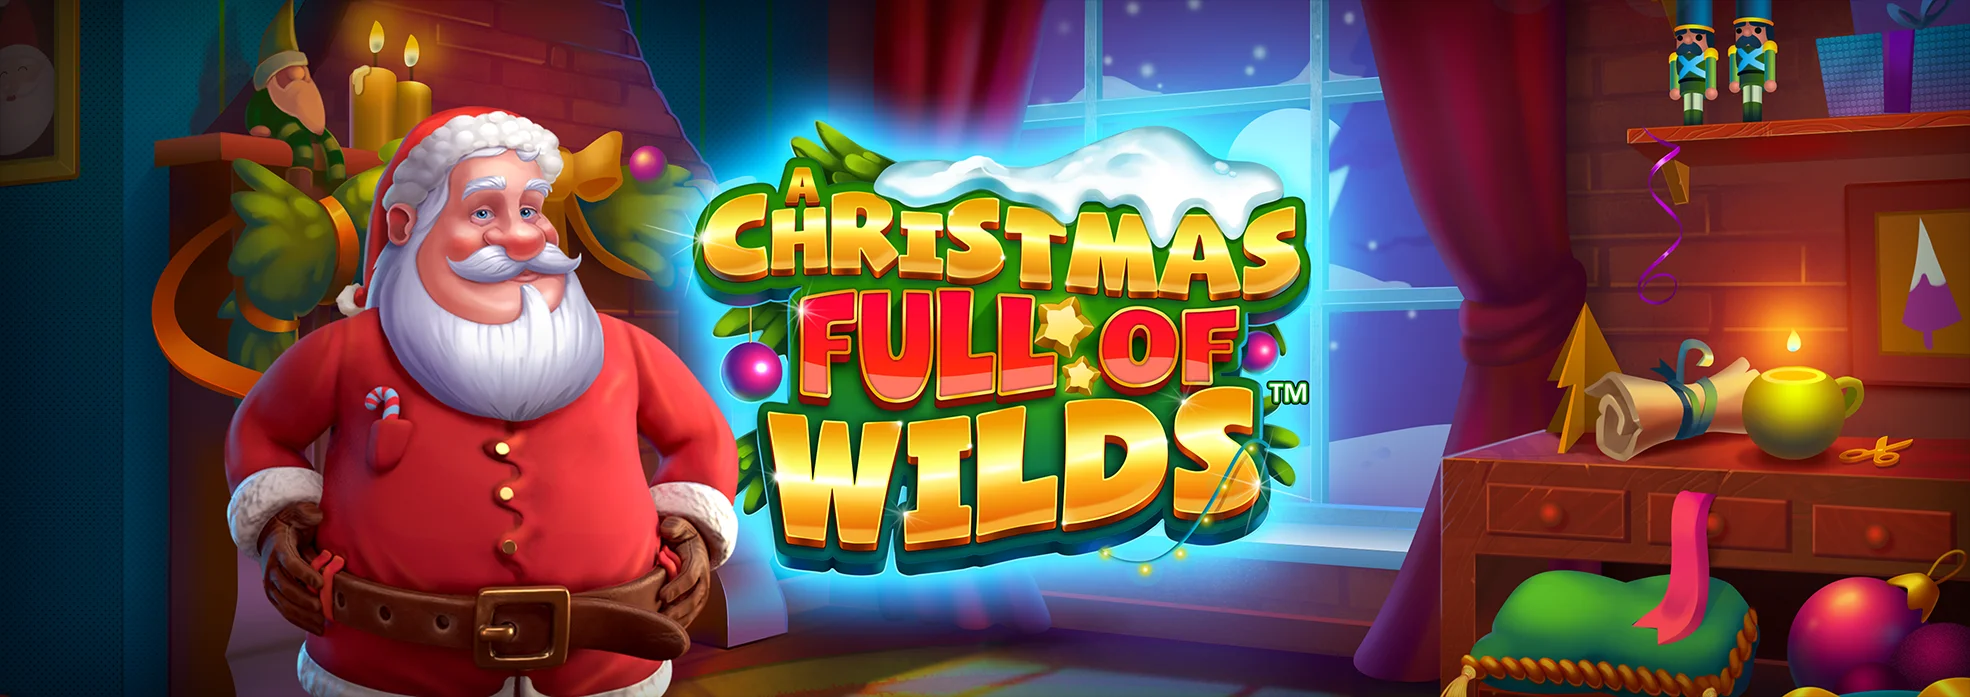 A Christmas Full of Wilds: New Christmas Slot Lands at Unibet Casino